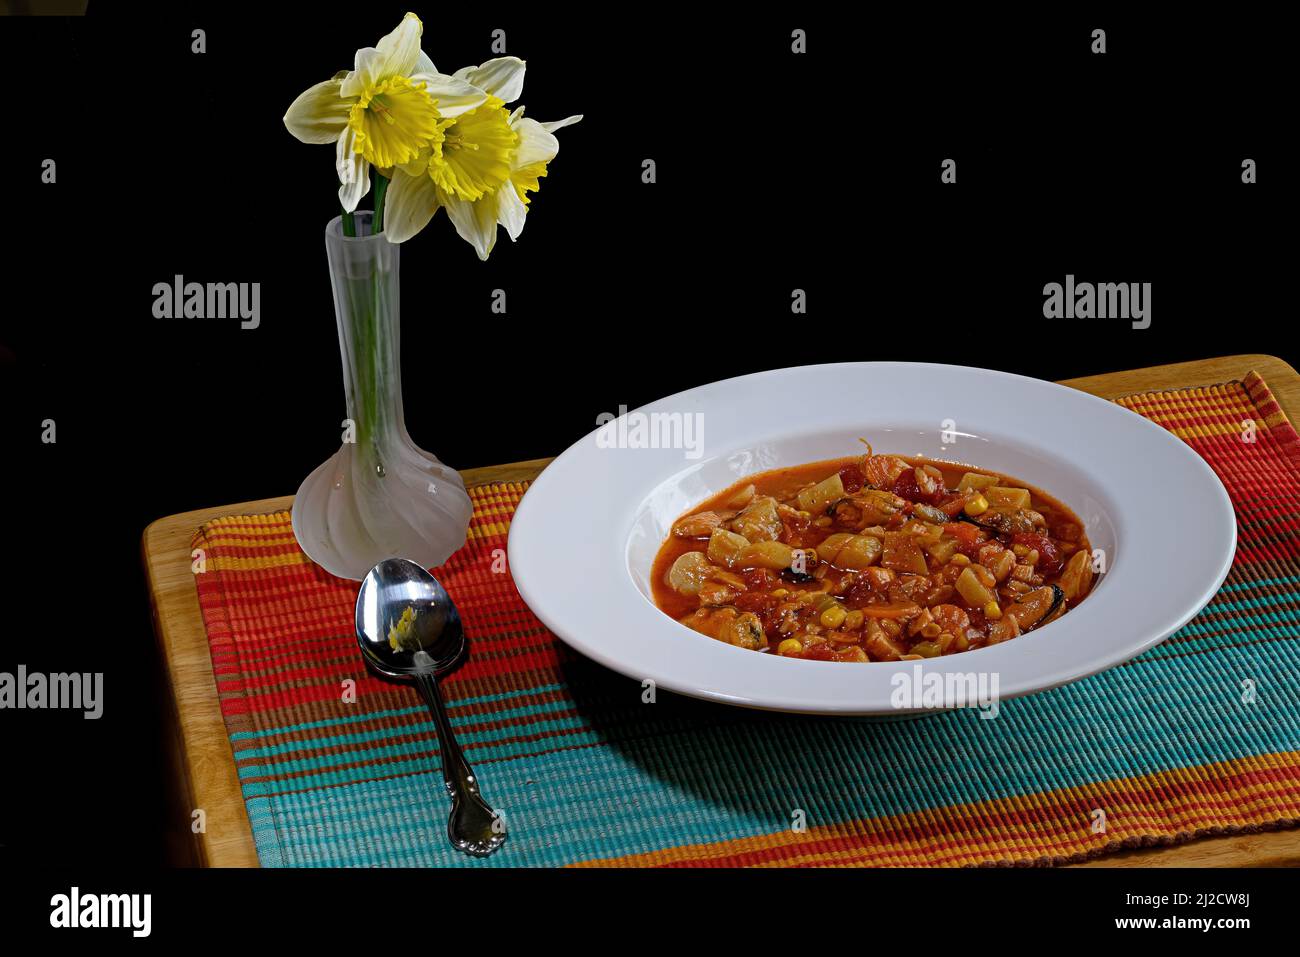 A bowl of homemade fish stew comprised of sustainably harvested scallops, shrimp, squid, muscles and white fish. Stock Photo